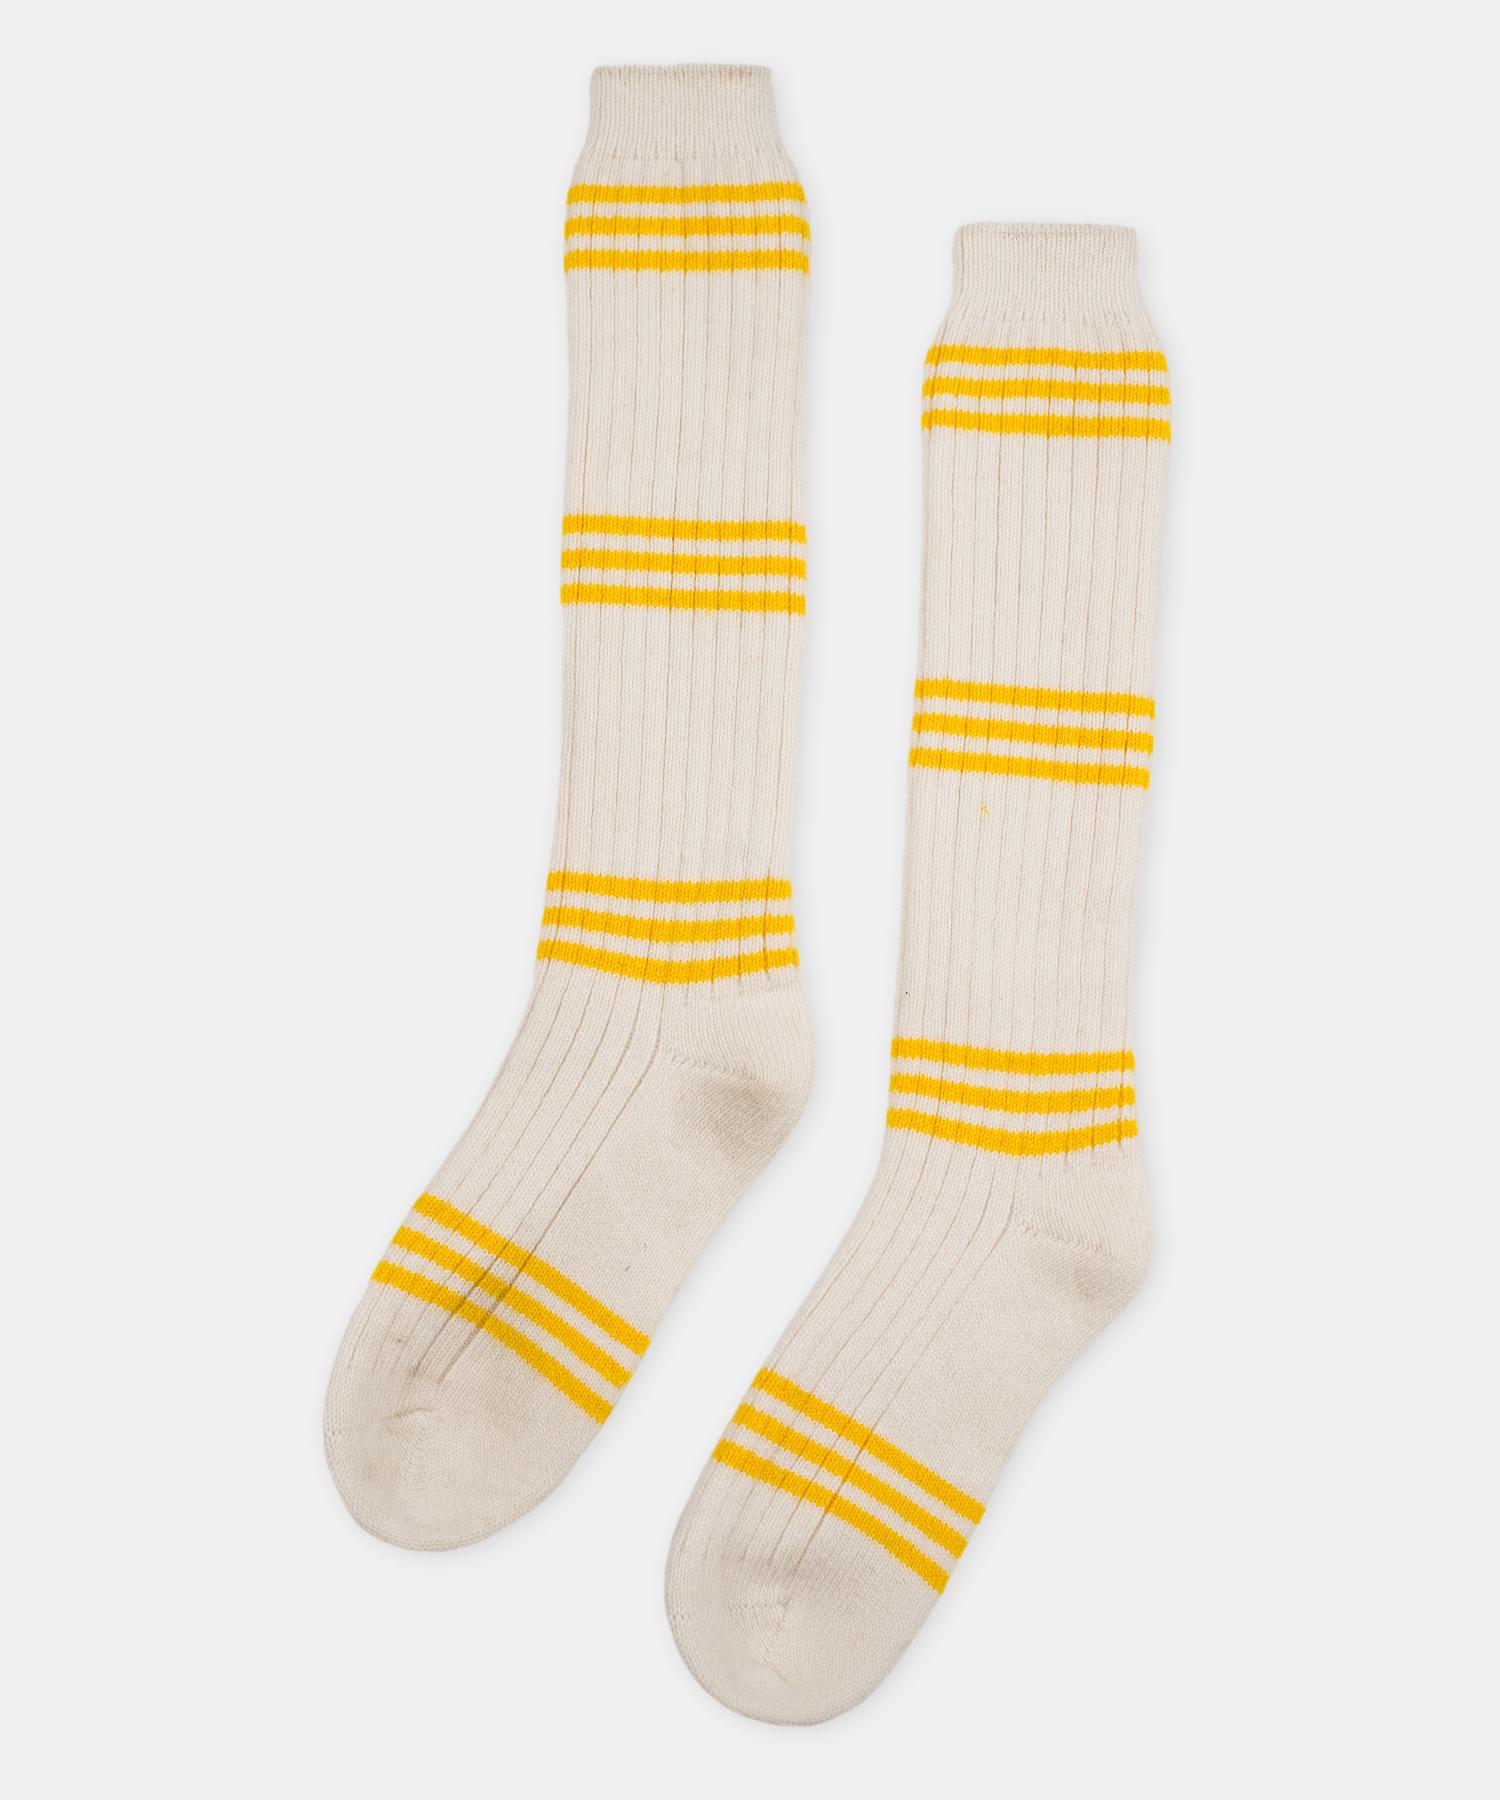 Striped Cashmere tube socks by Saved, New York

100% Cashmere. A luxurious take on a classic, calf-high athletic sock. One size. Stripe available in red and yellow. Please inquire for availability and lead time.